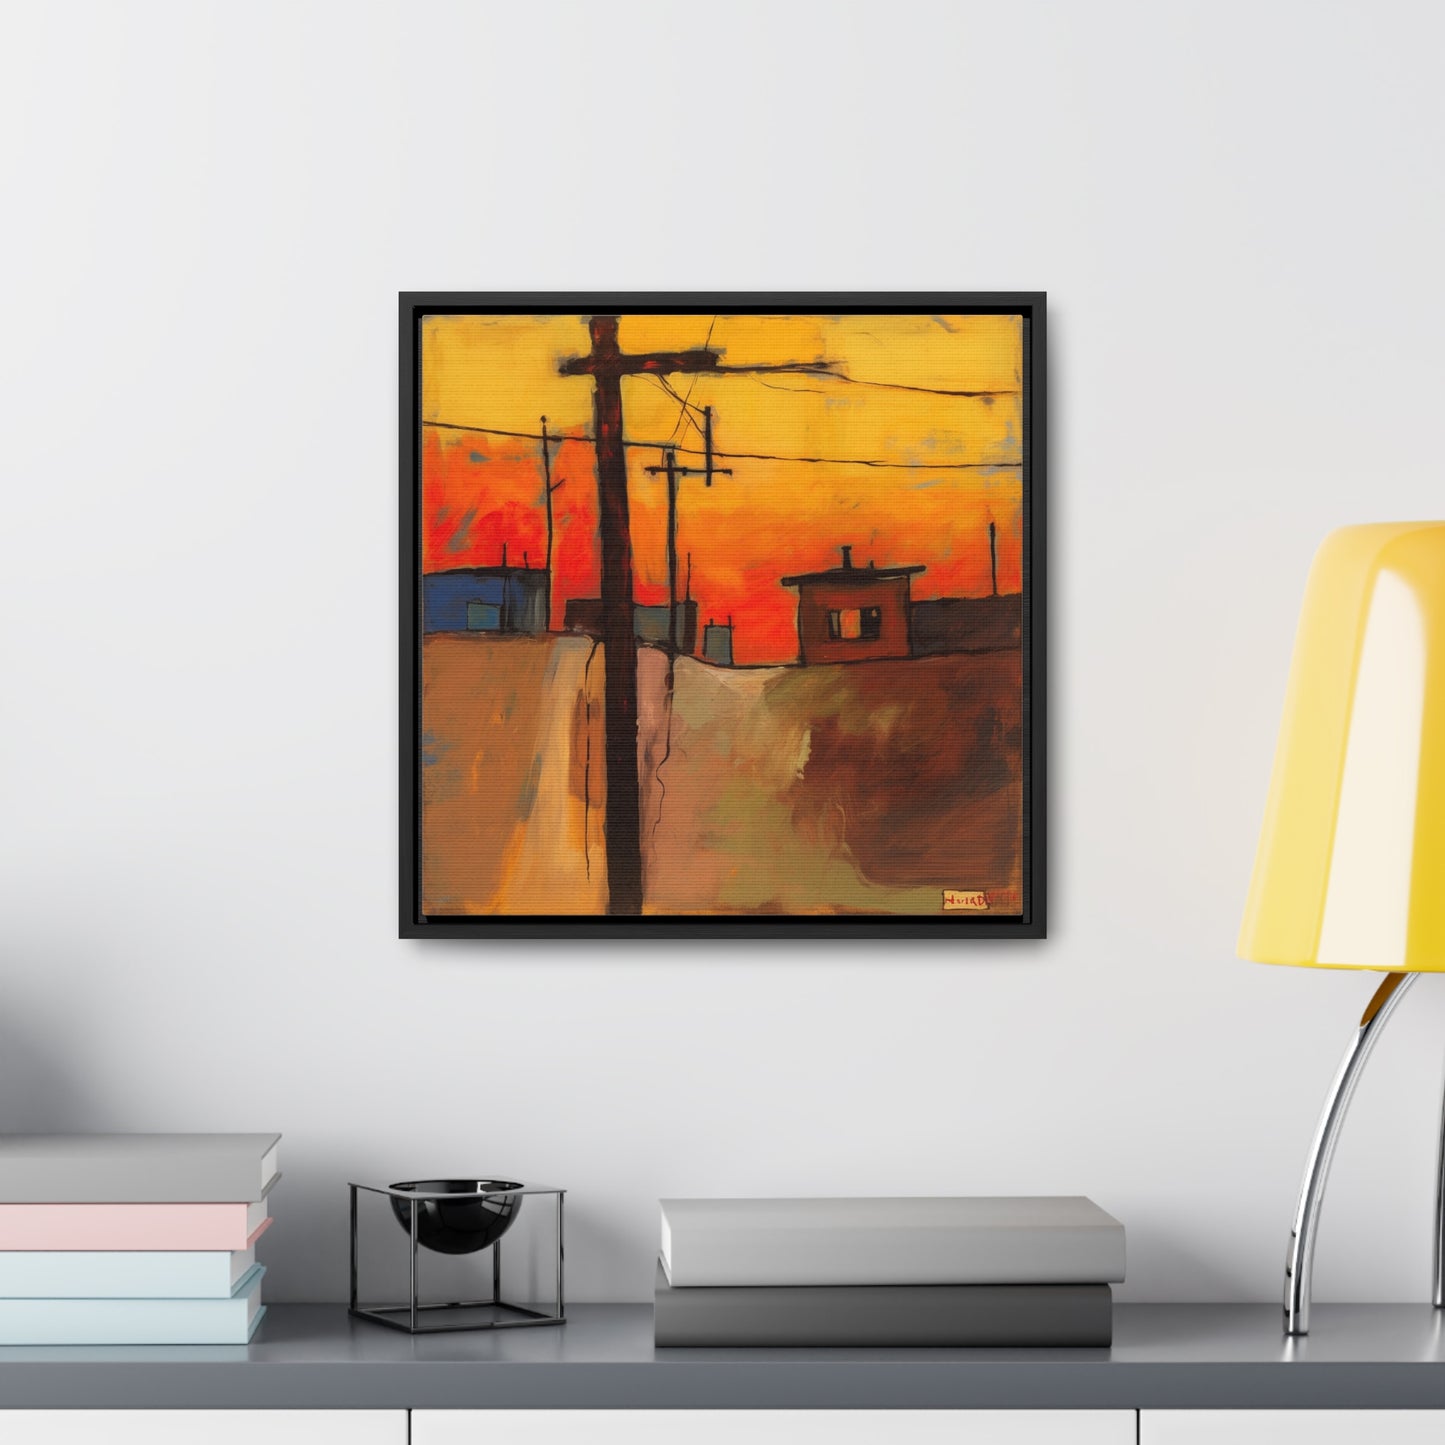 Land of the Sun 72, Valentinii, Gallery Canvas Wraps, Square Frame